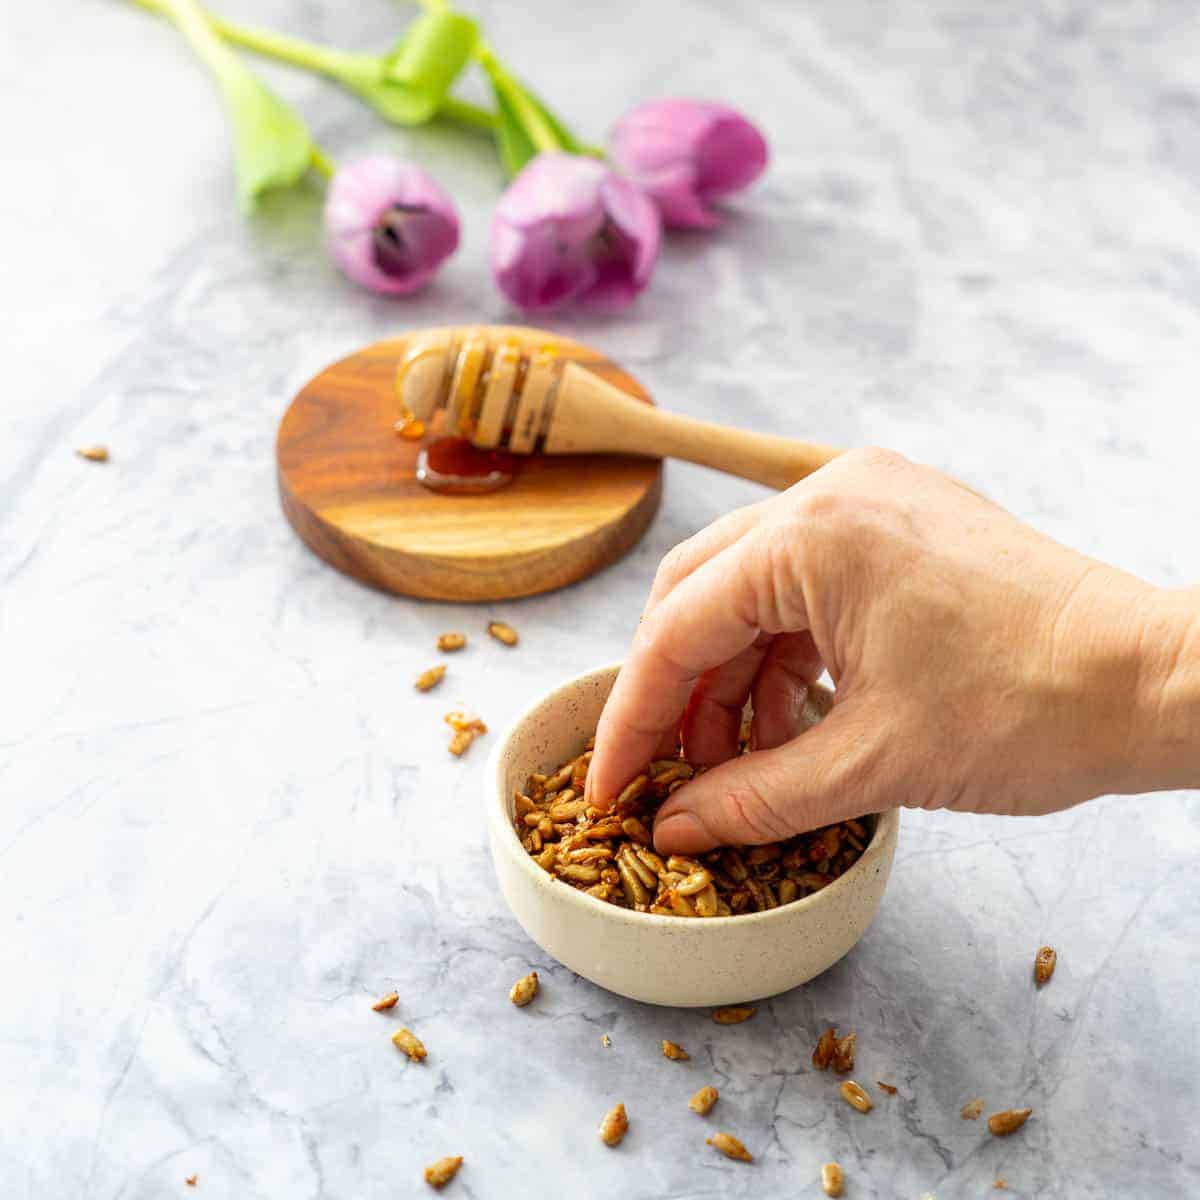 Faded in the background are some purple tulips beside the honey dipper stick on a wooden board. In front is a small oatmeal coloured bowl with roasted seeds with a hand pinching some.